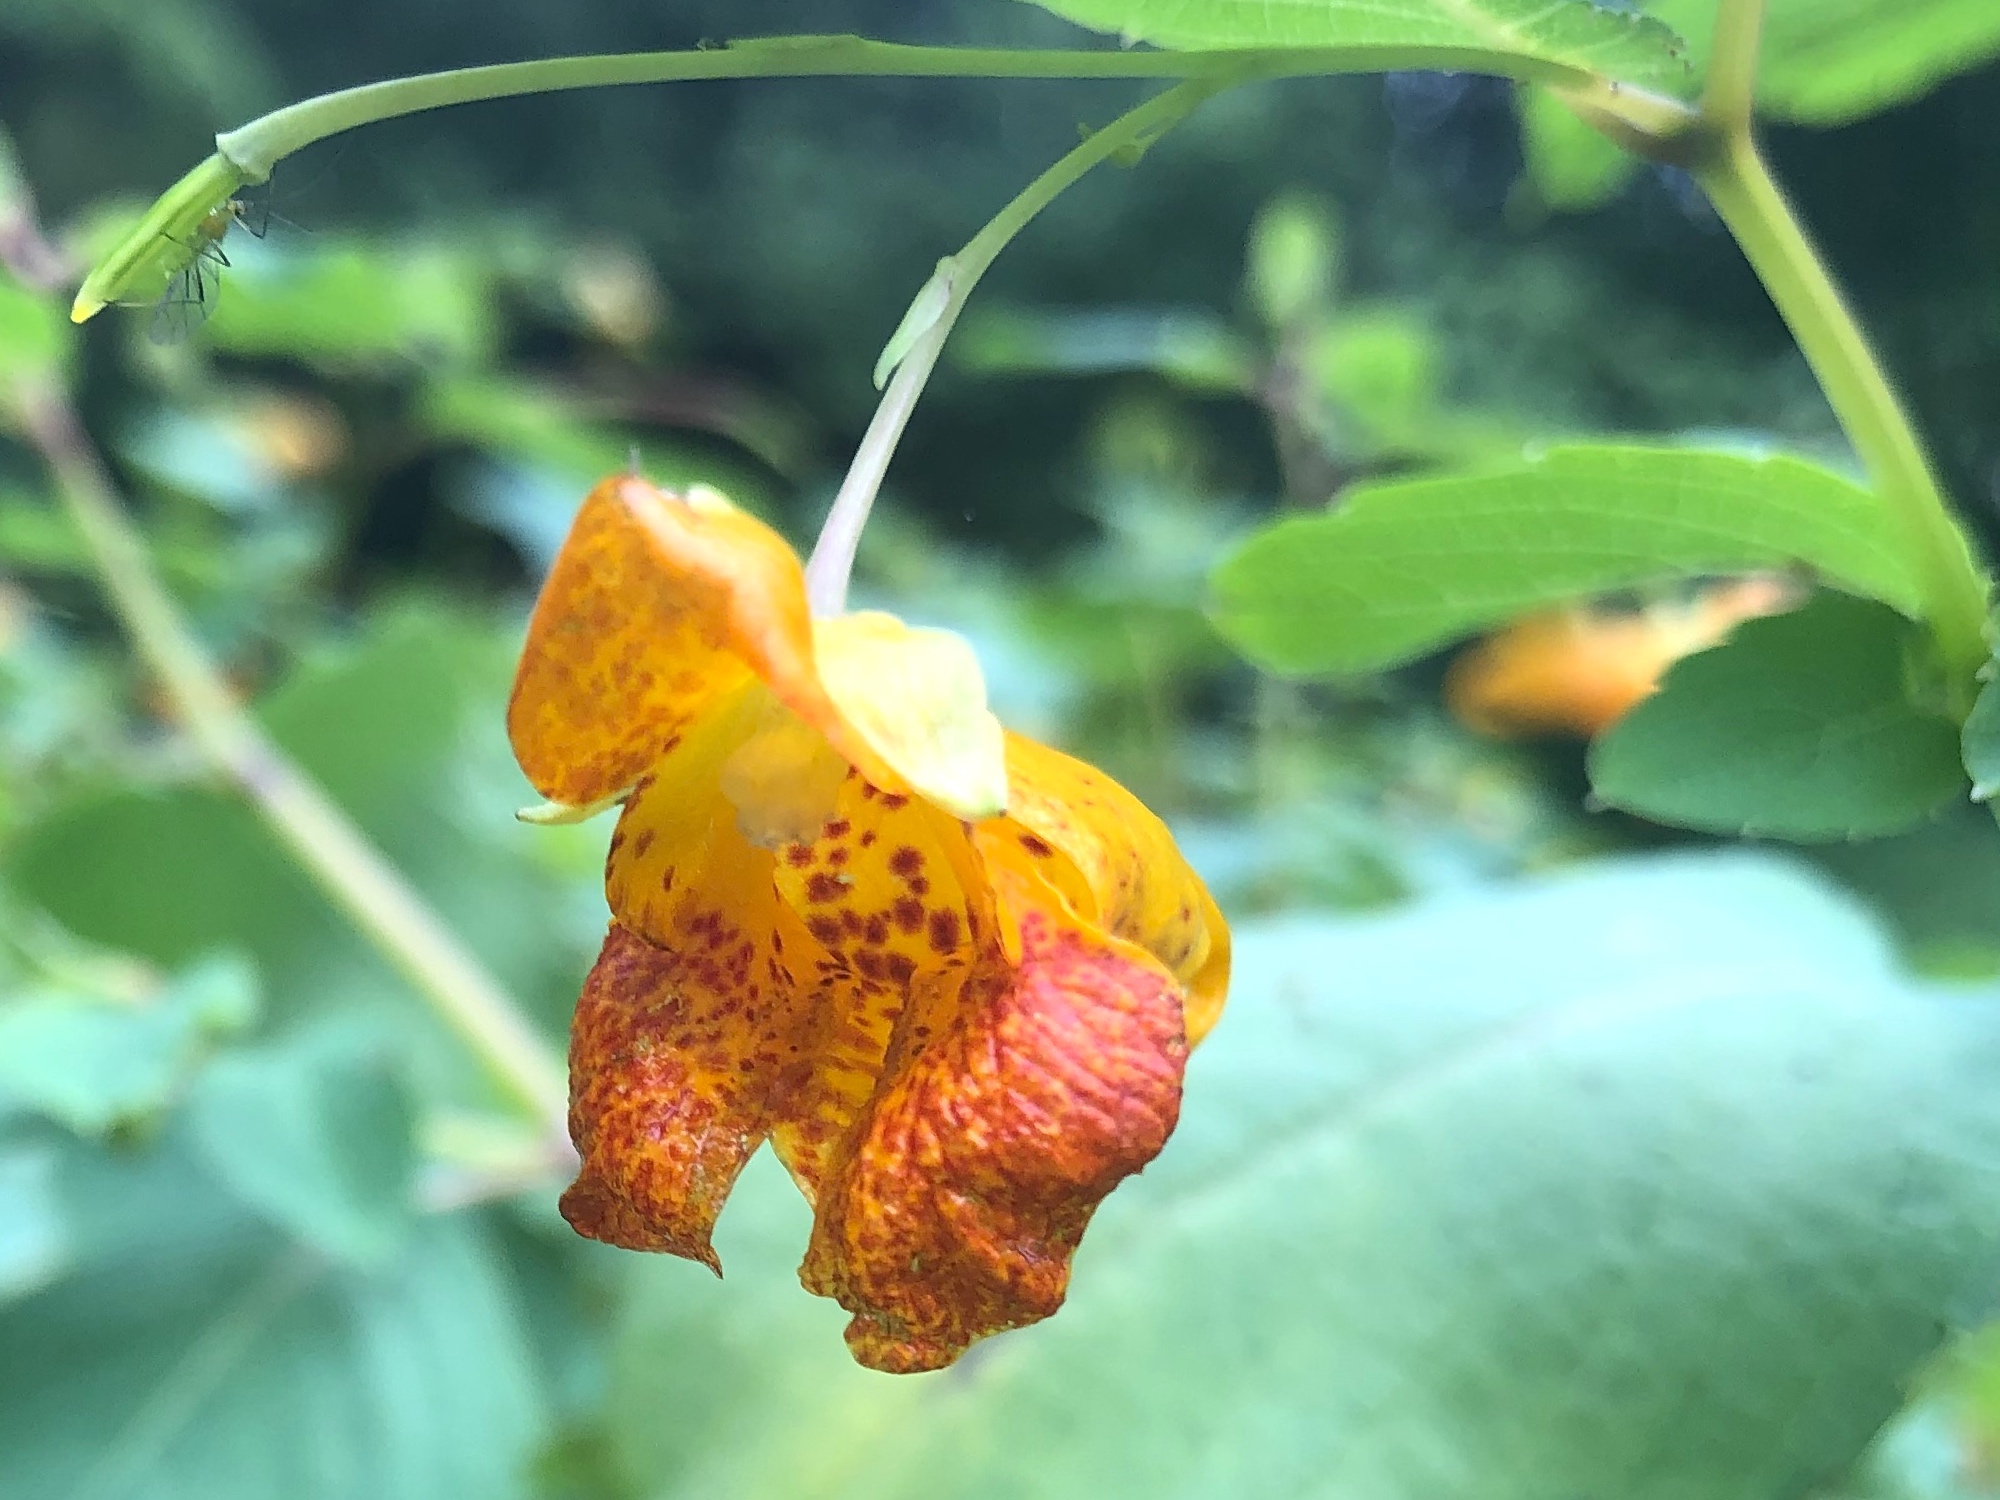 Spotted Jewelweed in Nakoma Park on August 11, 2019.